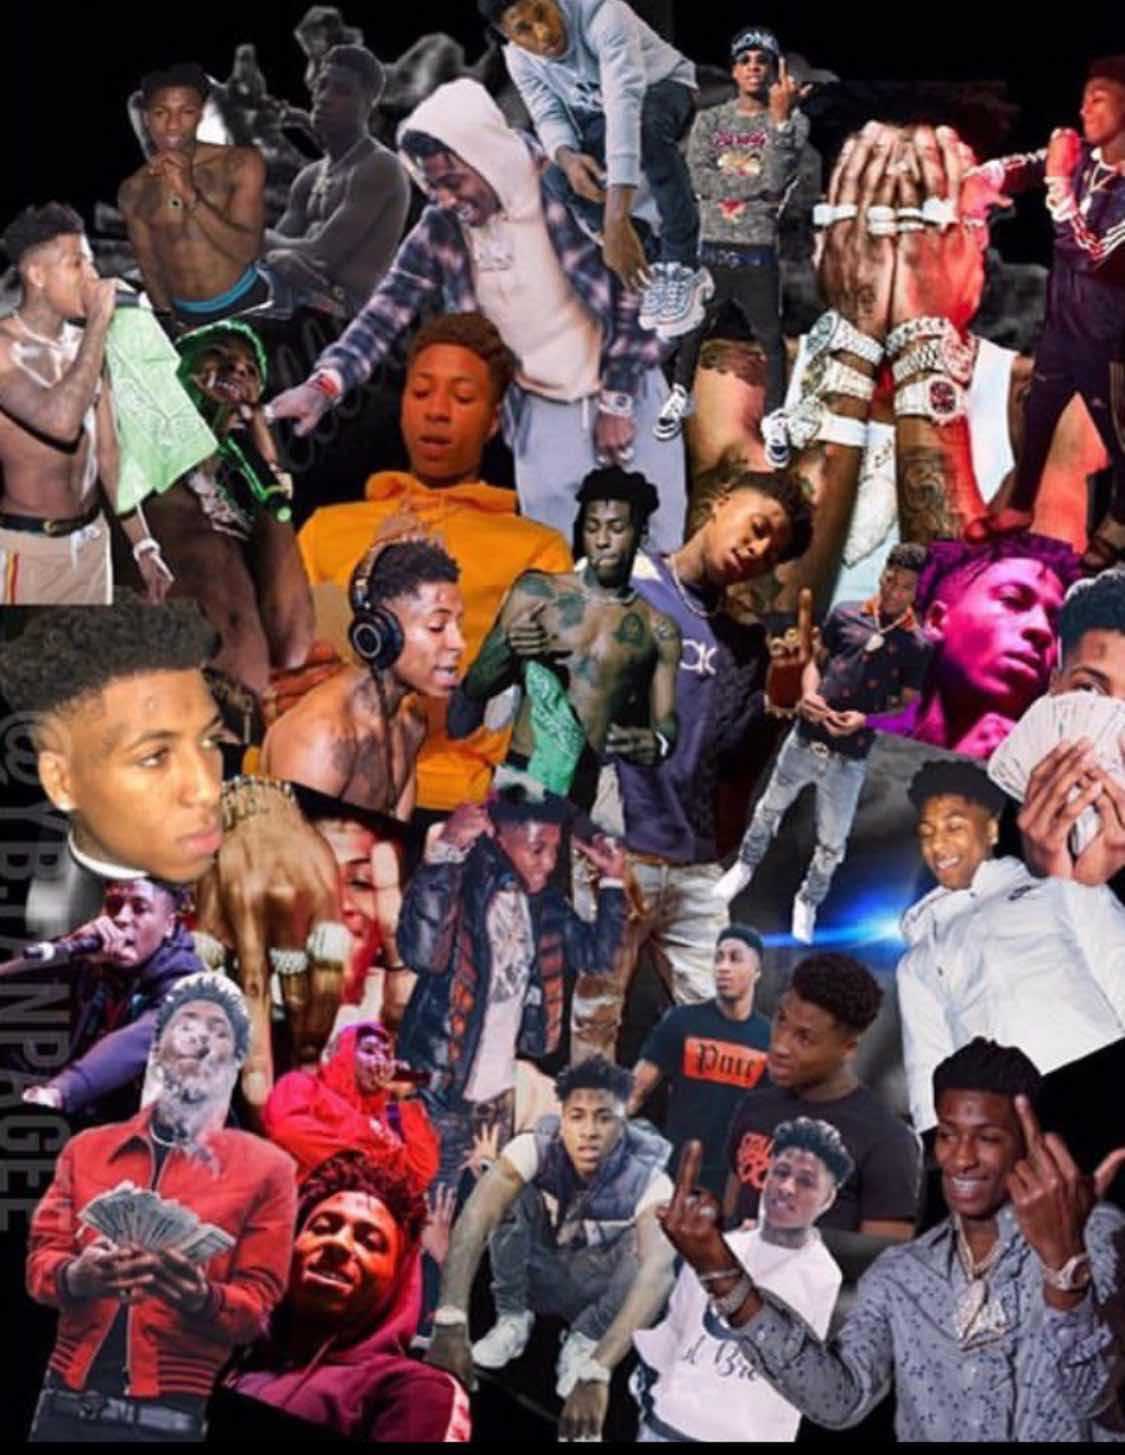 Youngboy Never Broke Again Wallpapers